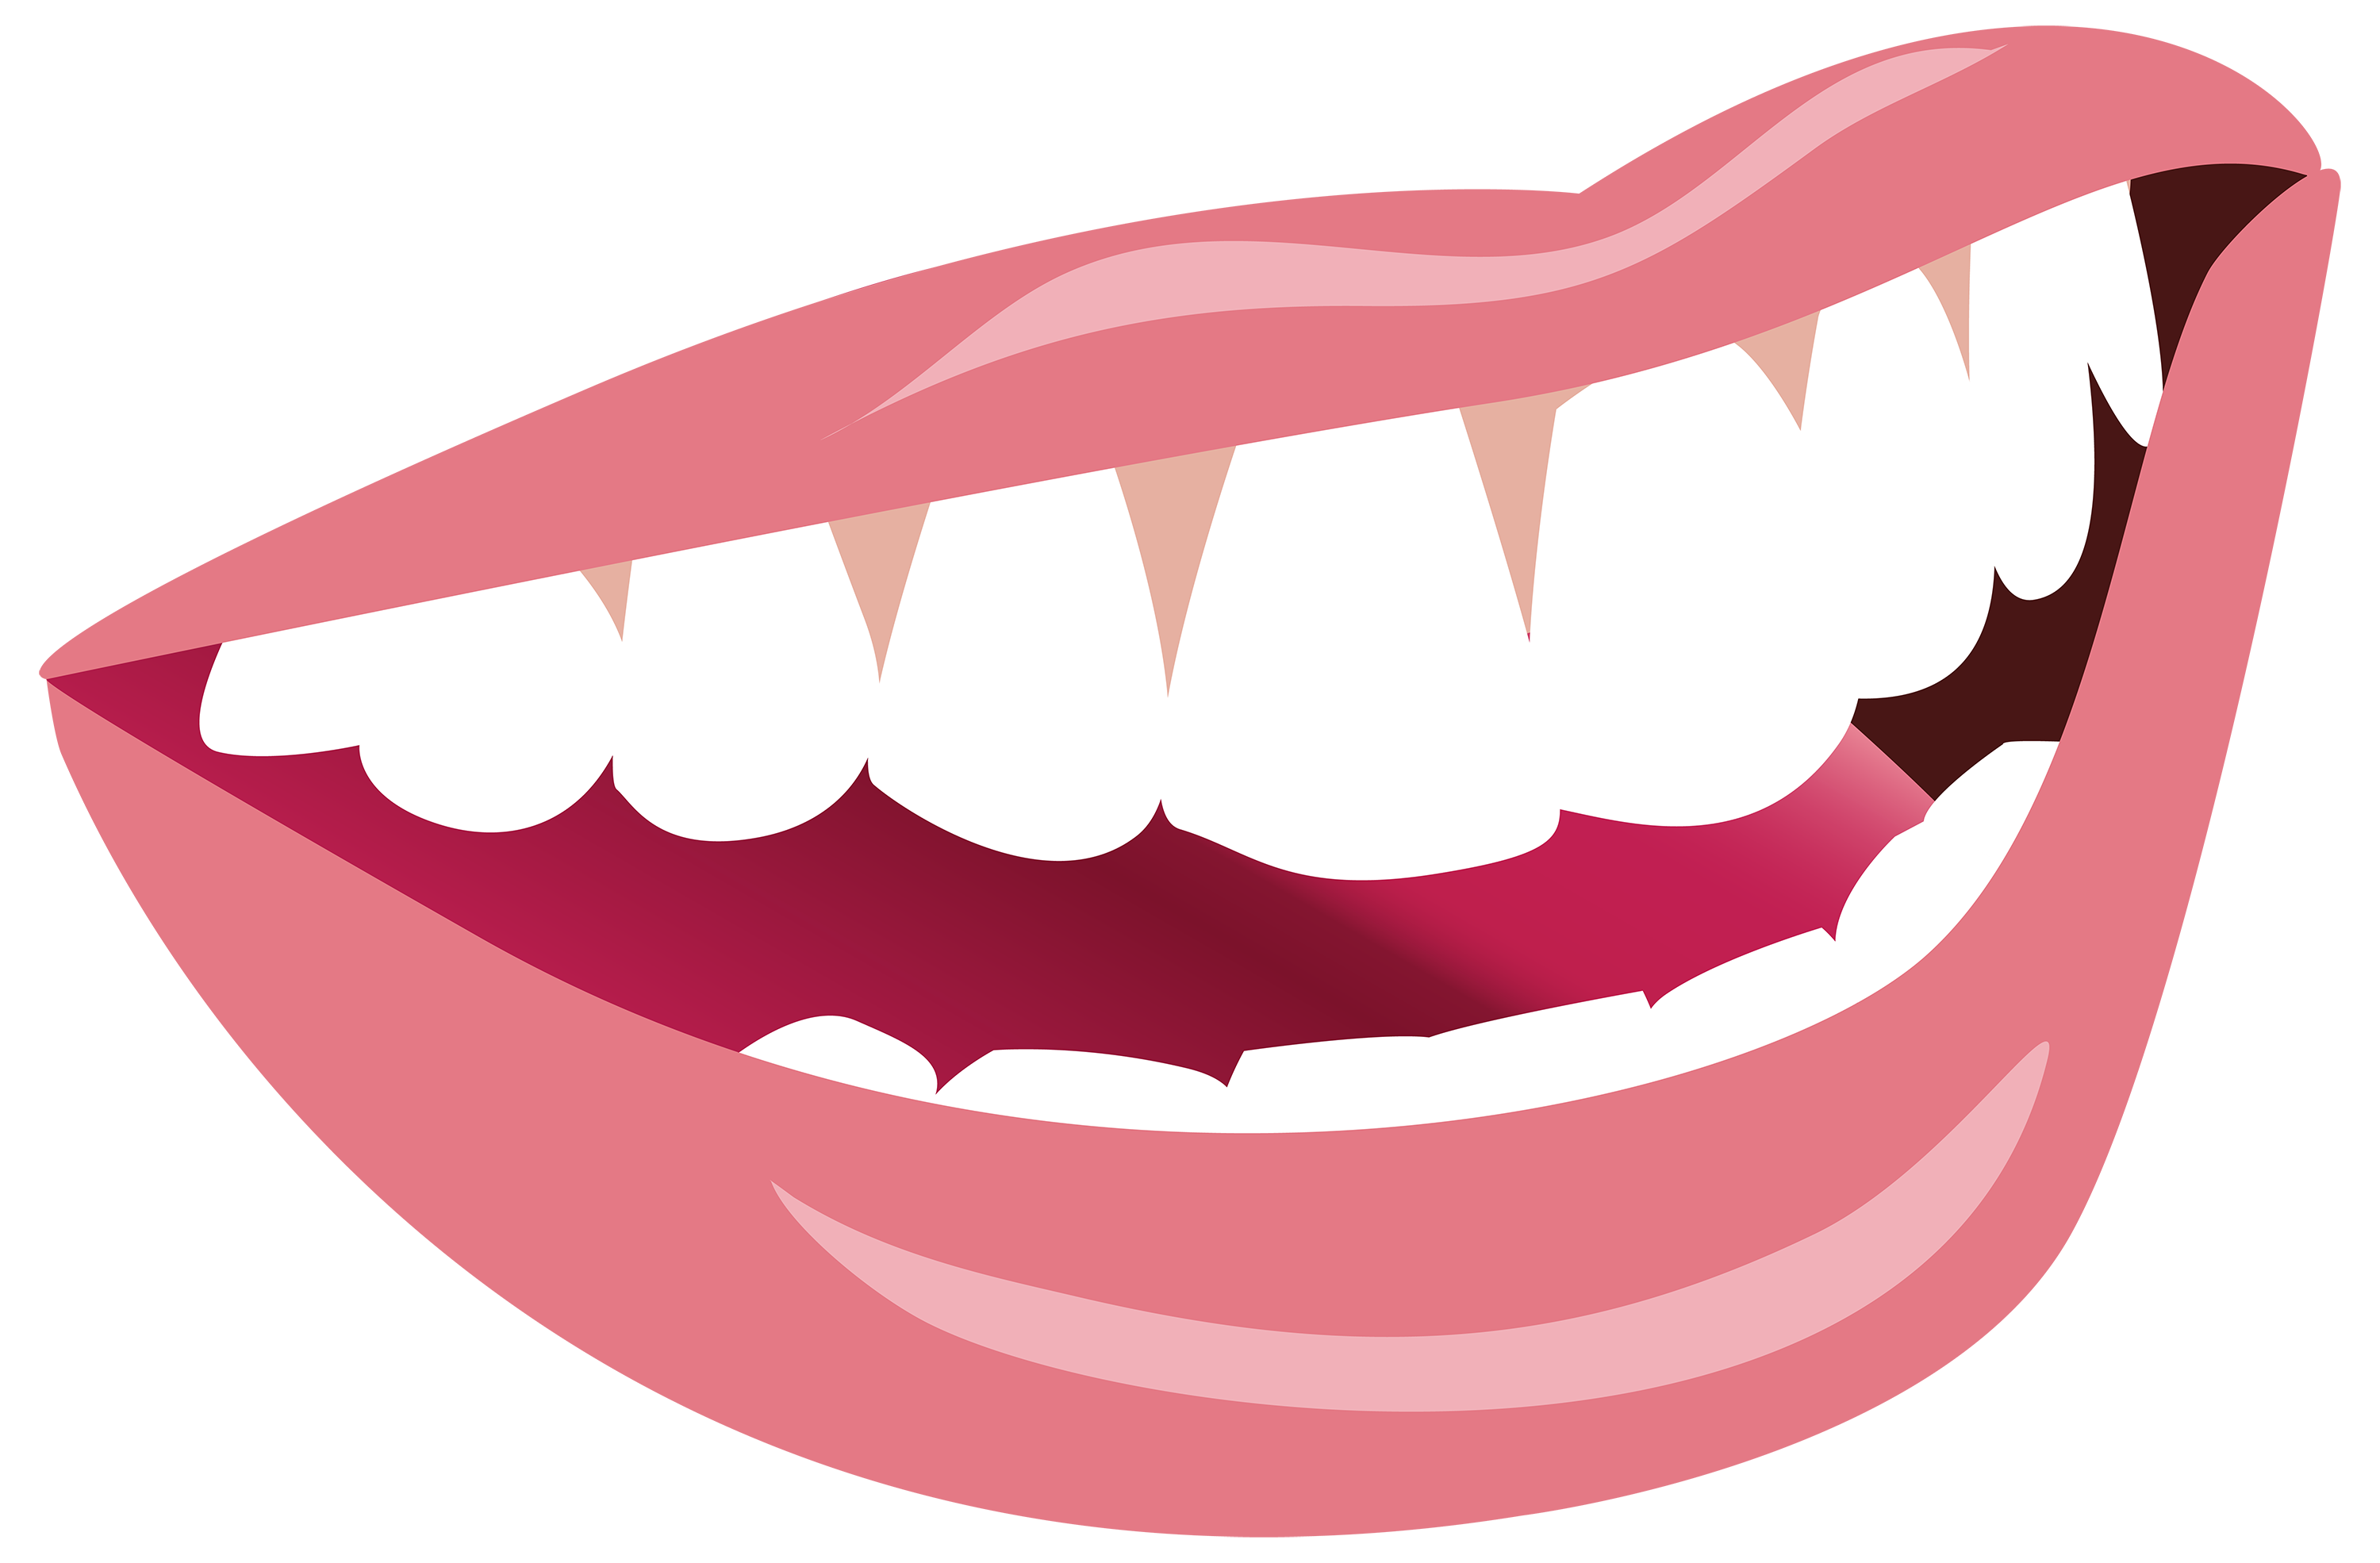 Dentist clipart healthy tooth. Smiling mouth png image